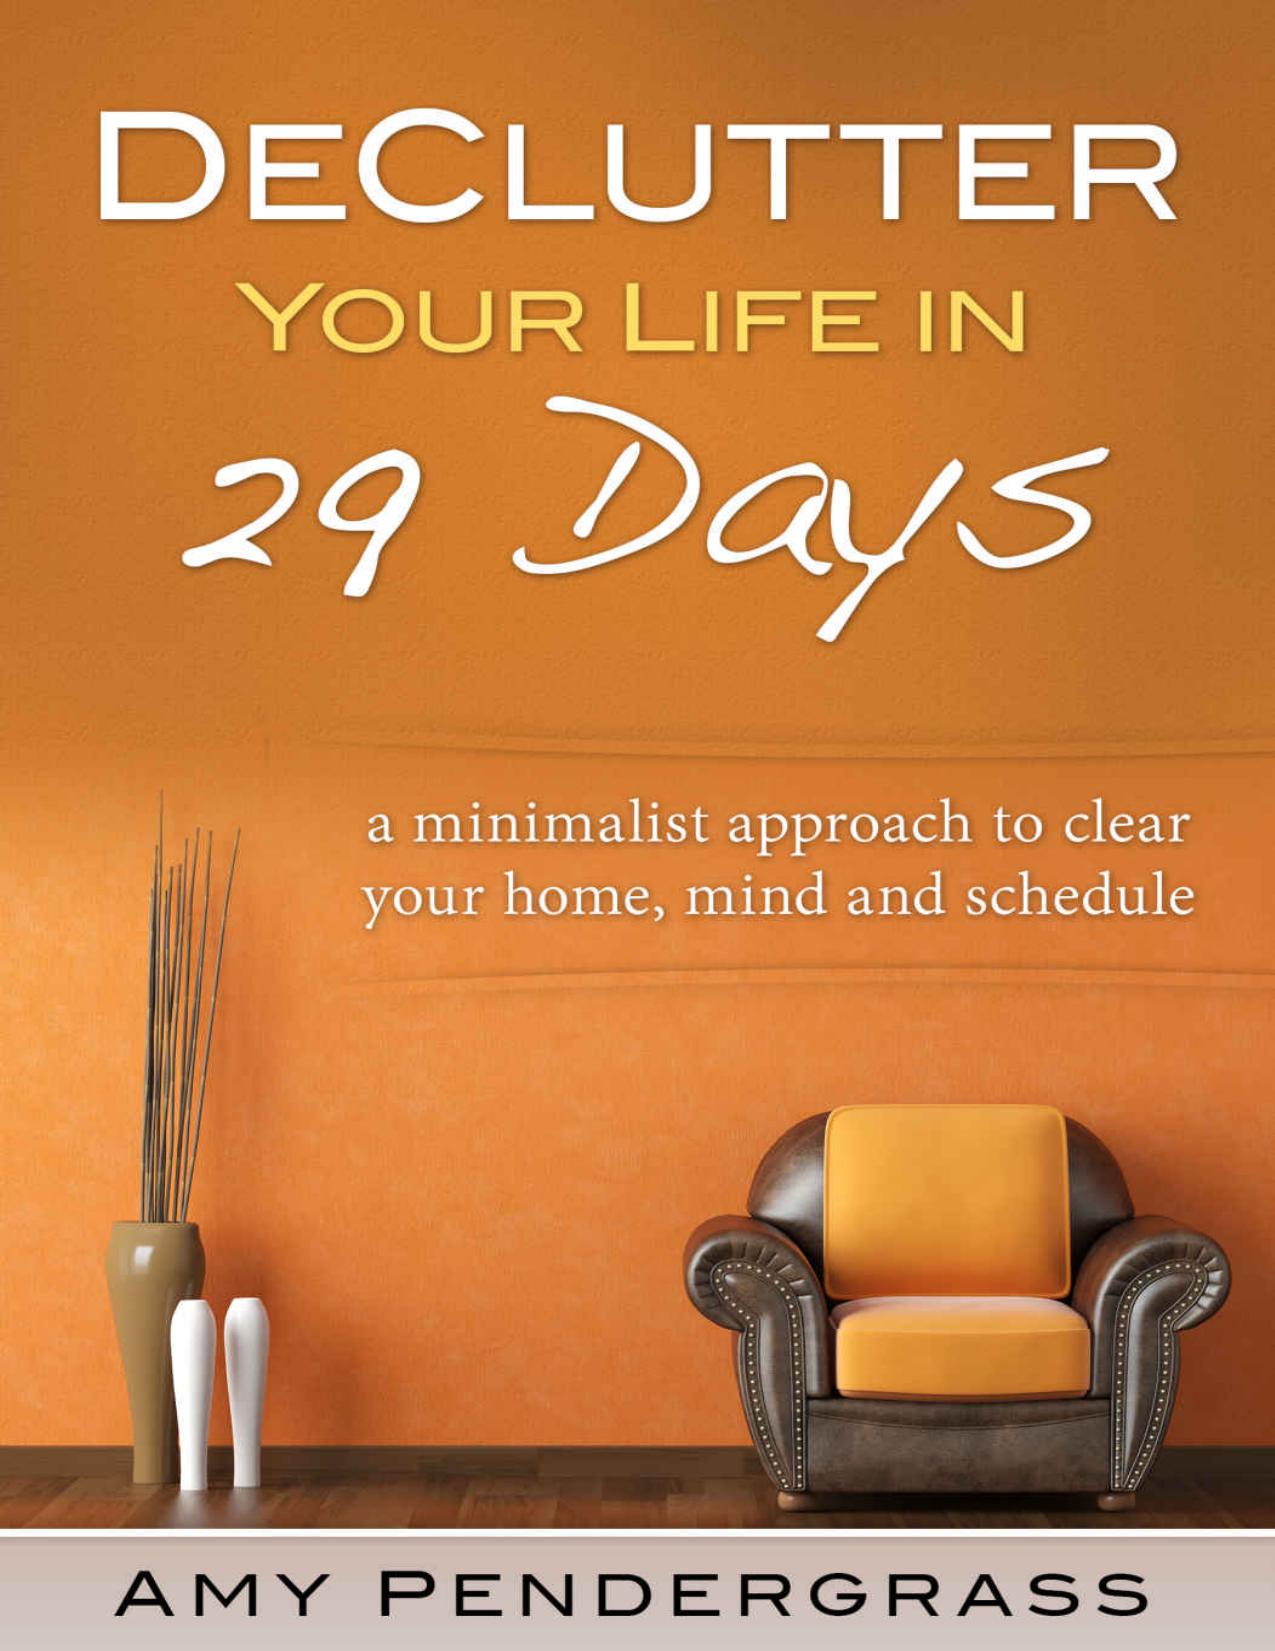 Declutter: Your Life! A Minimalist Approach to Organize Your Home, Mind and Schedule (organize, Decluttering, Minimalistic, Declutter, cleaning, organizing, simplify) by Amy Pendergrass